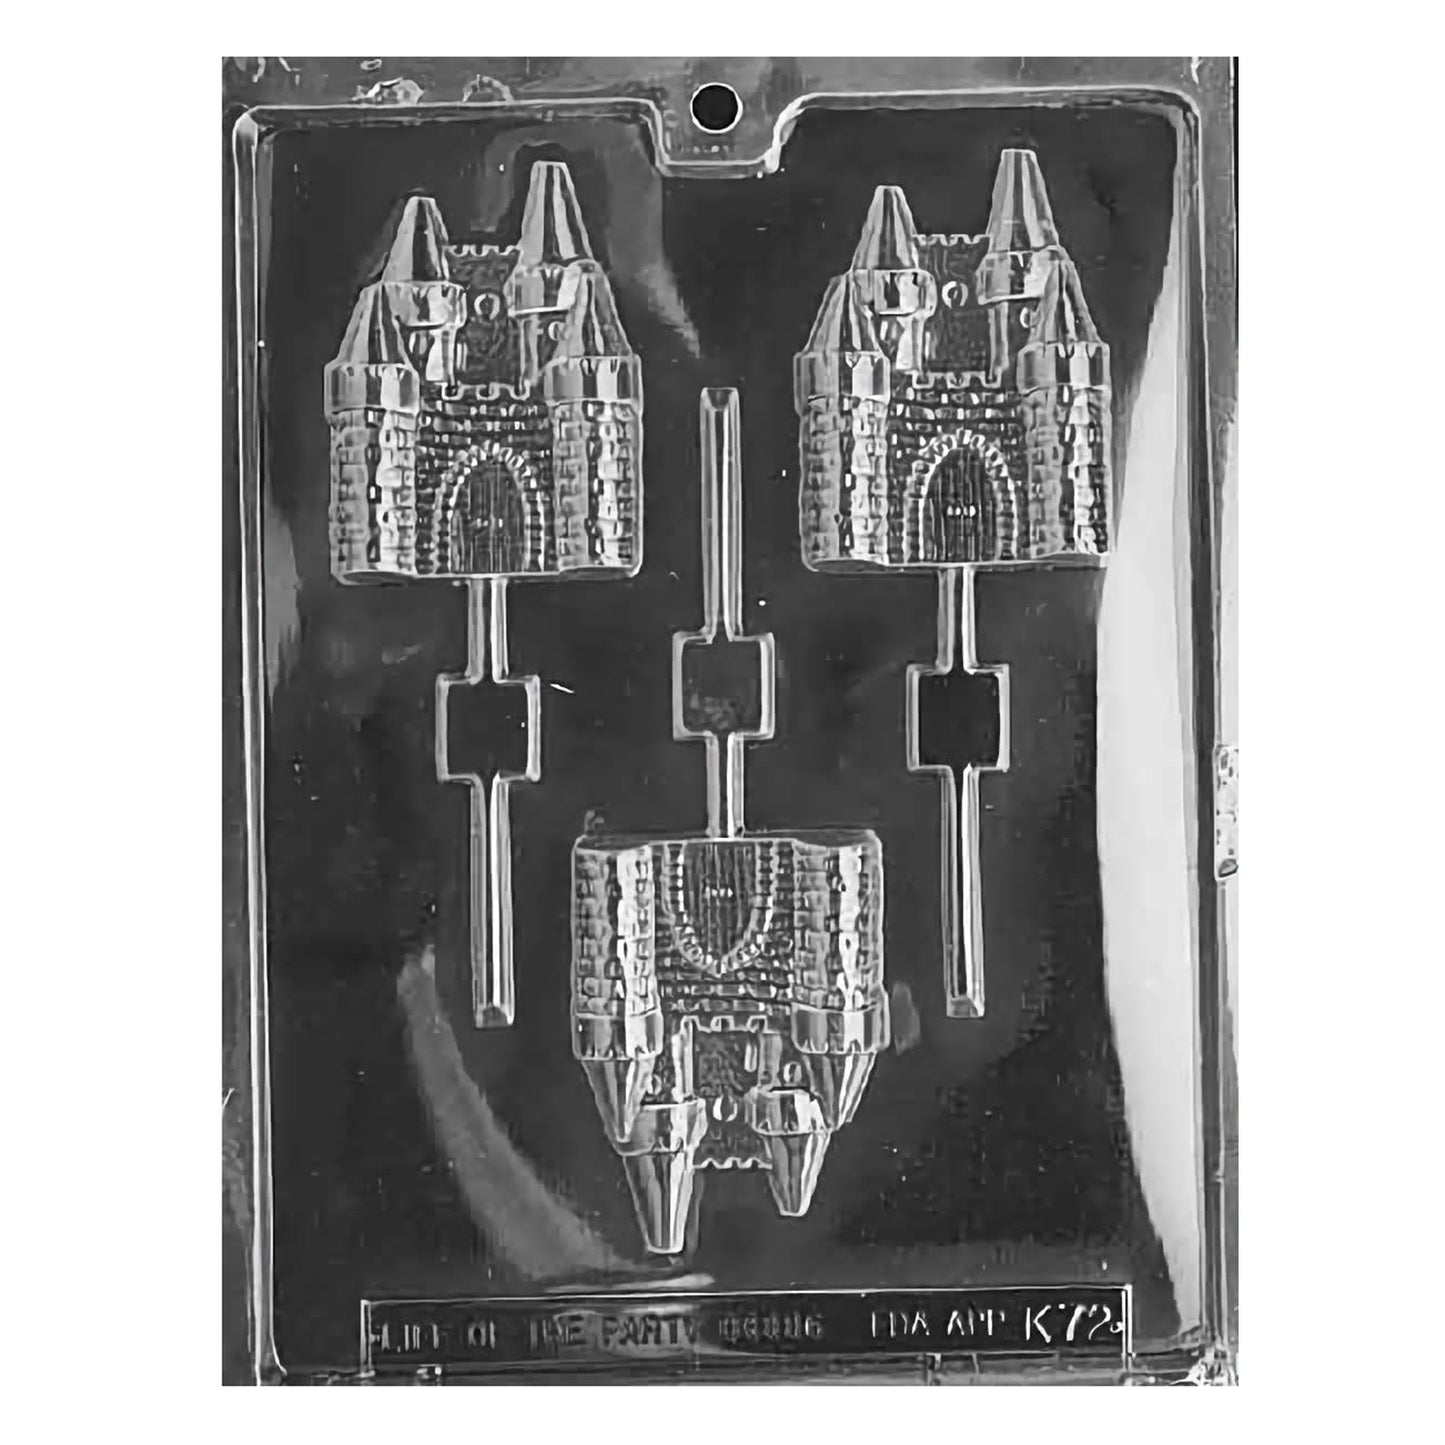 A set of three-dimensional castle chocolate lollipop molds, intricately detailed with turrets, bricks, and an arched gateway, ideal for creating magical treats for themed birthday parties or fairytale event favors.